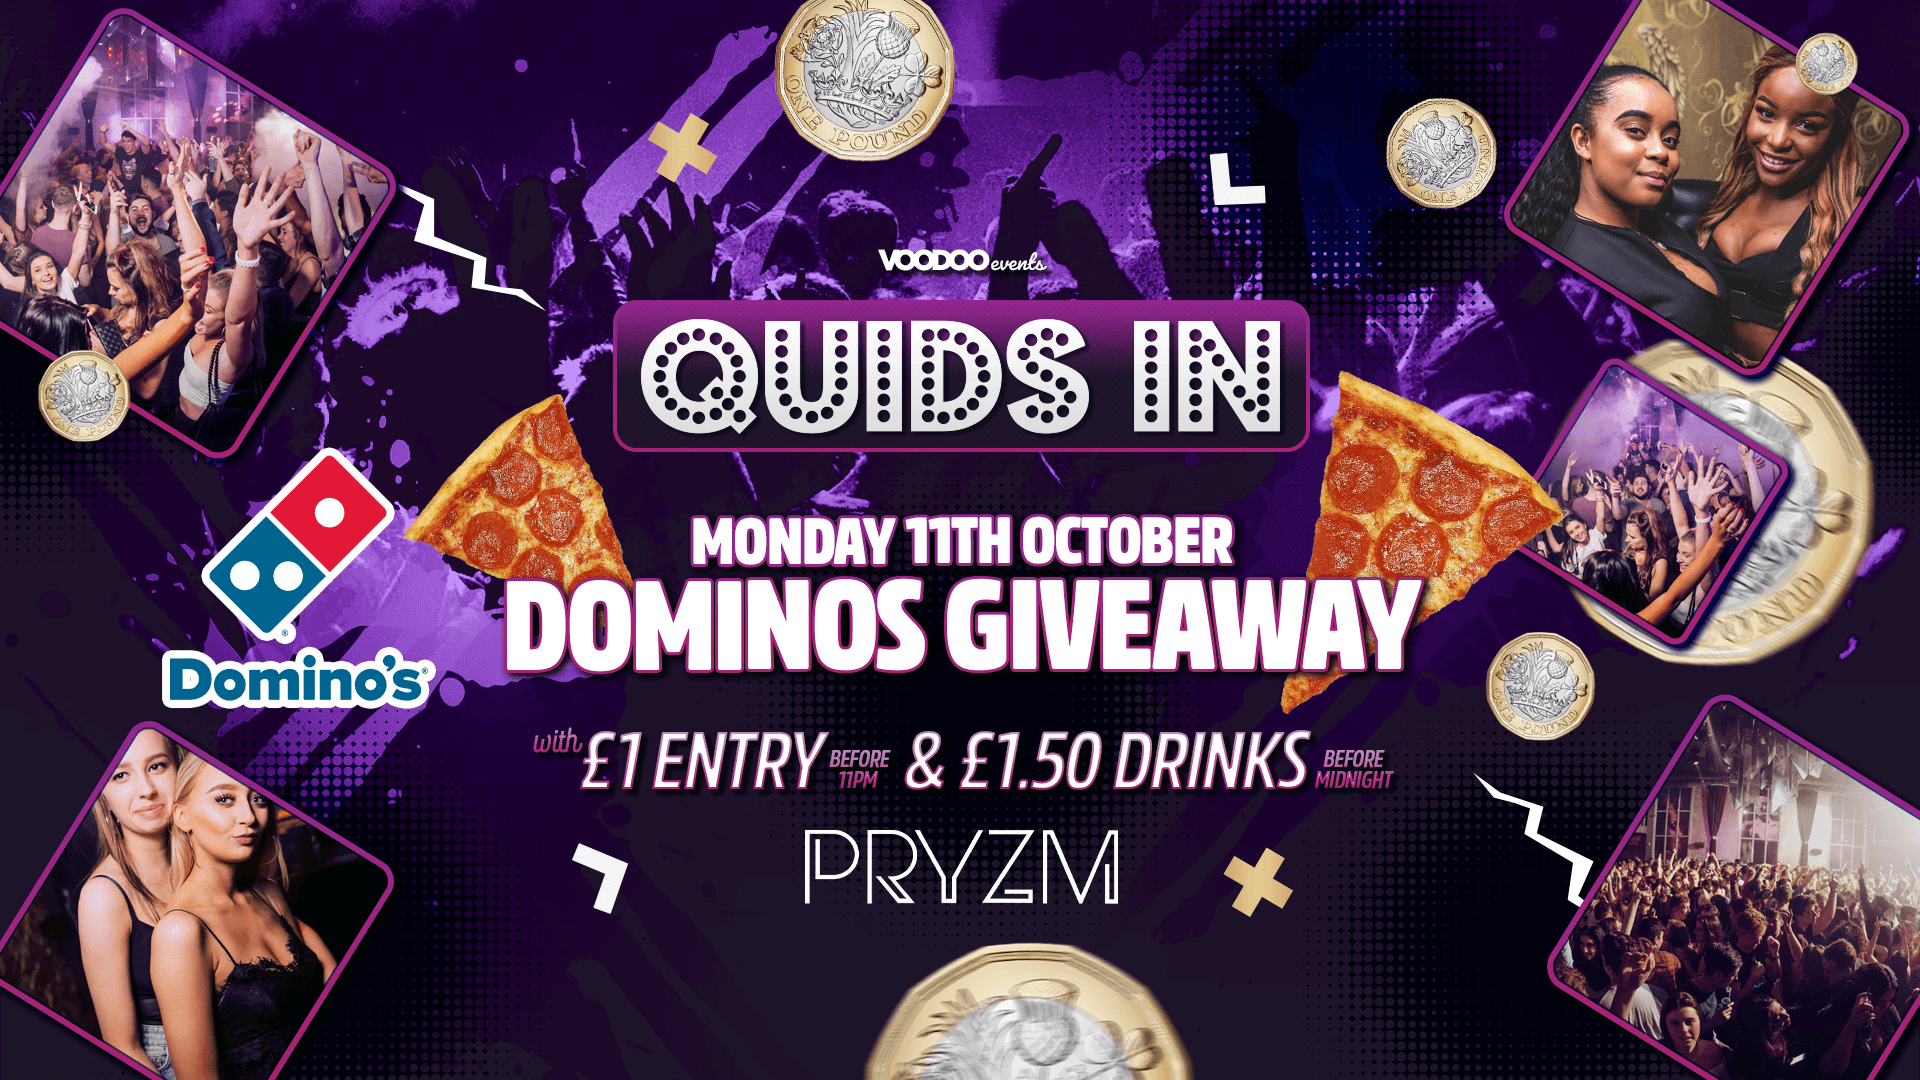 Quids In Mondays – Dominos Giveaway at PRYZM – 11th October